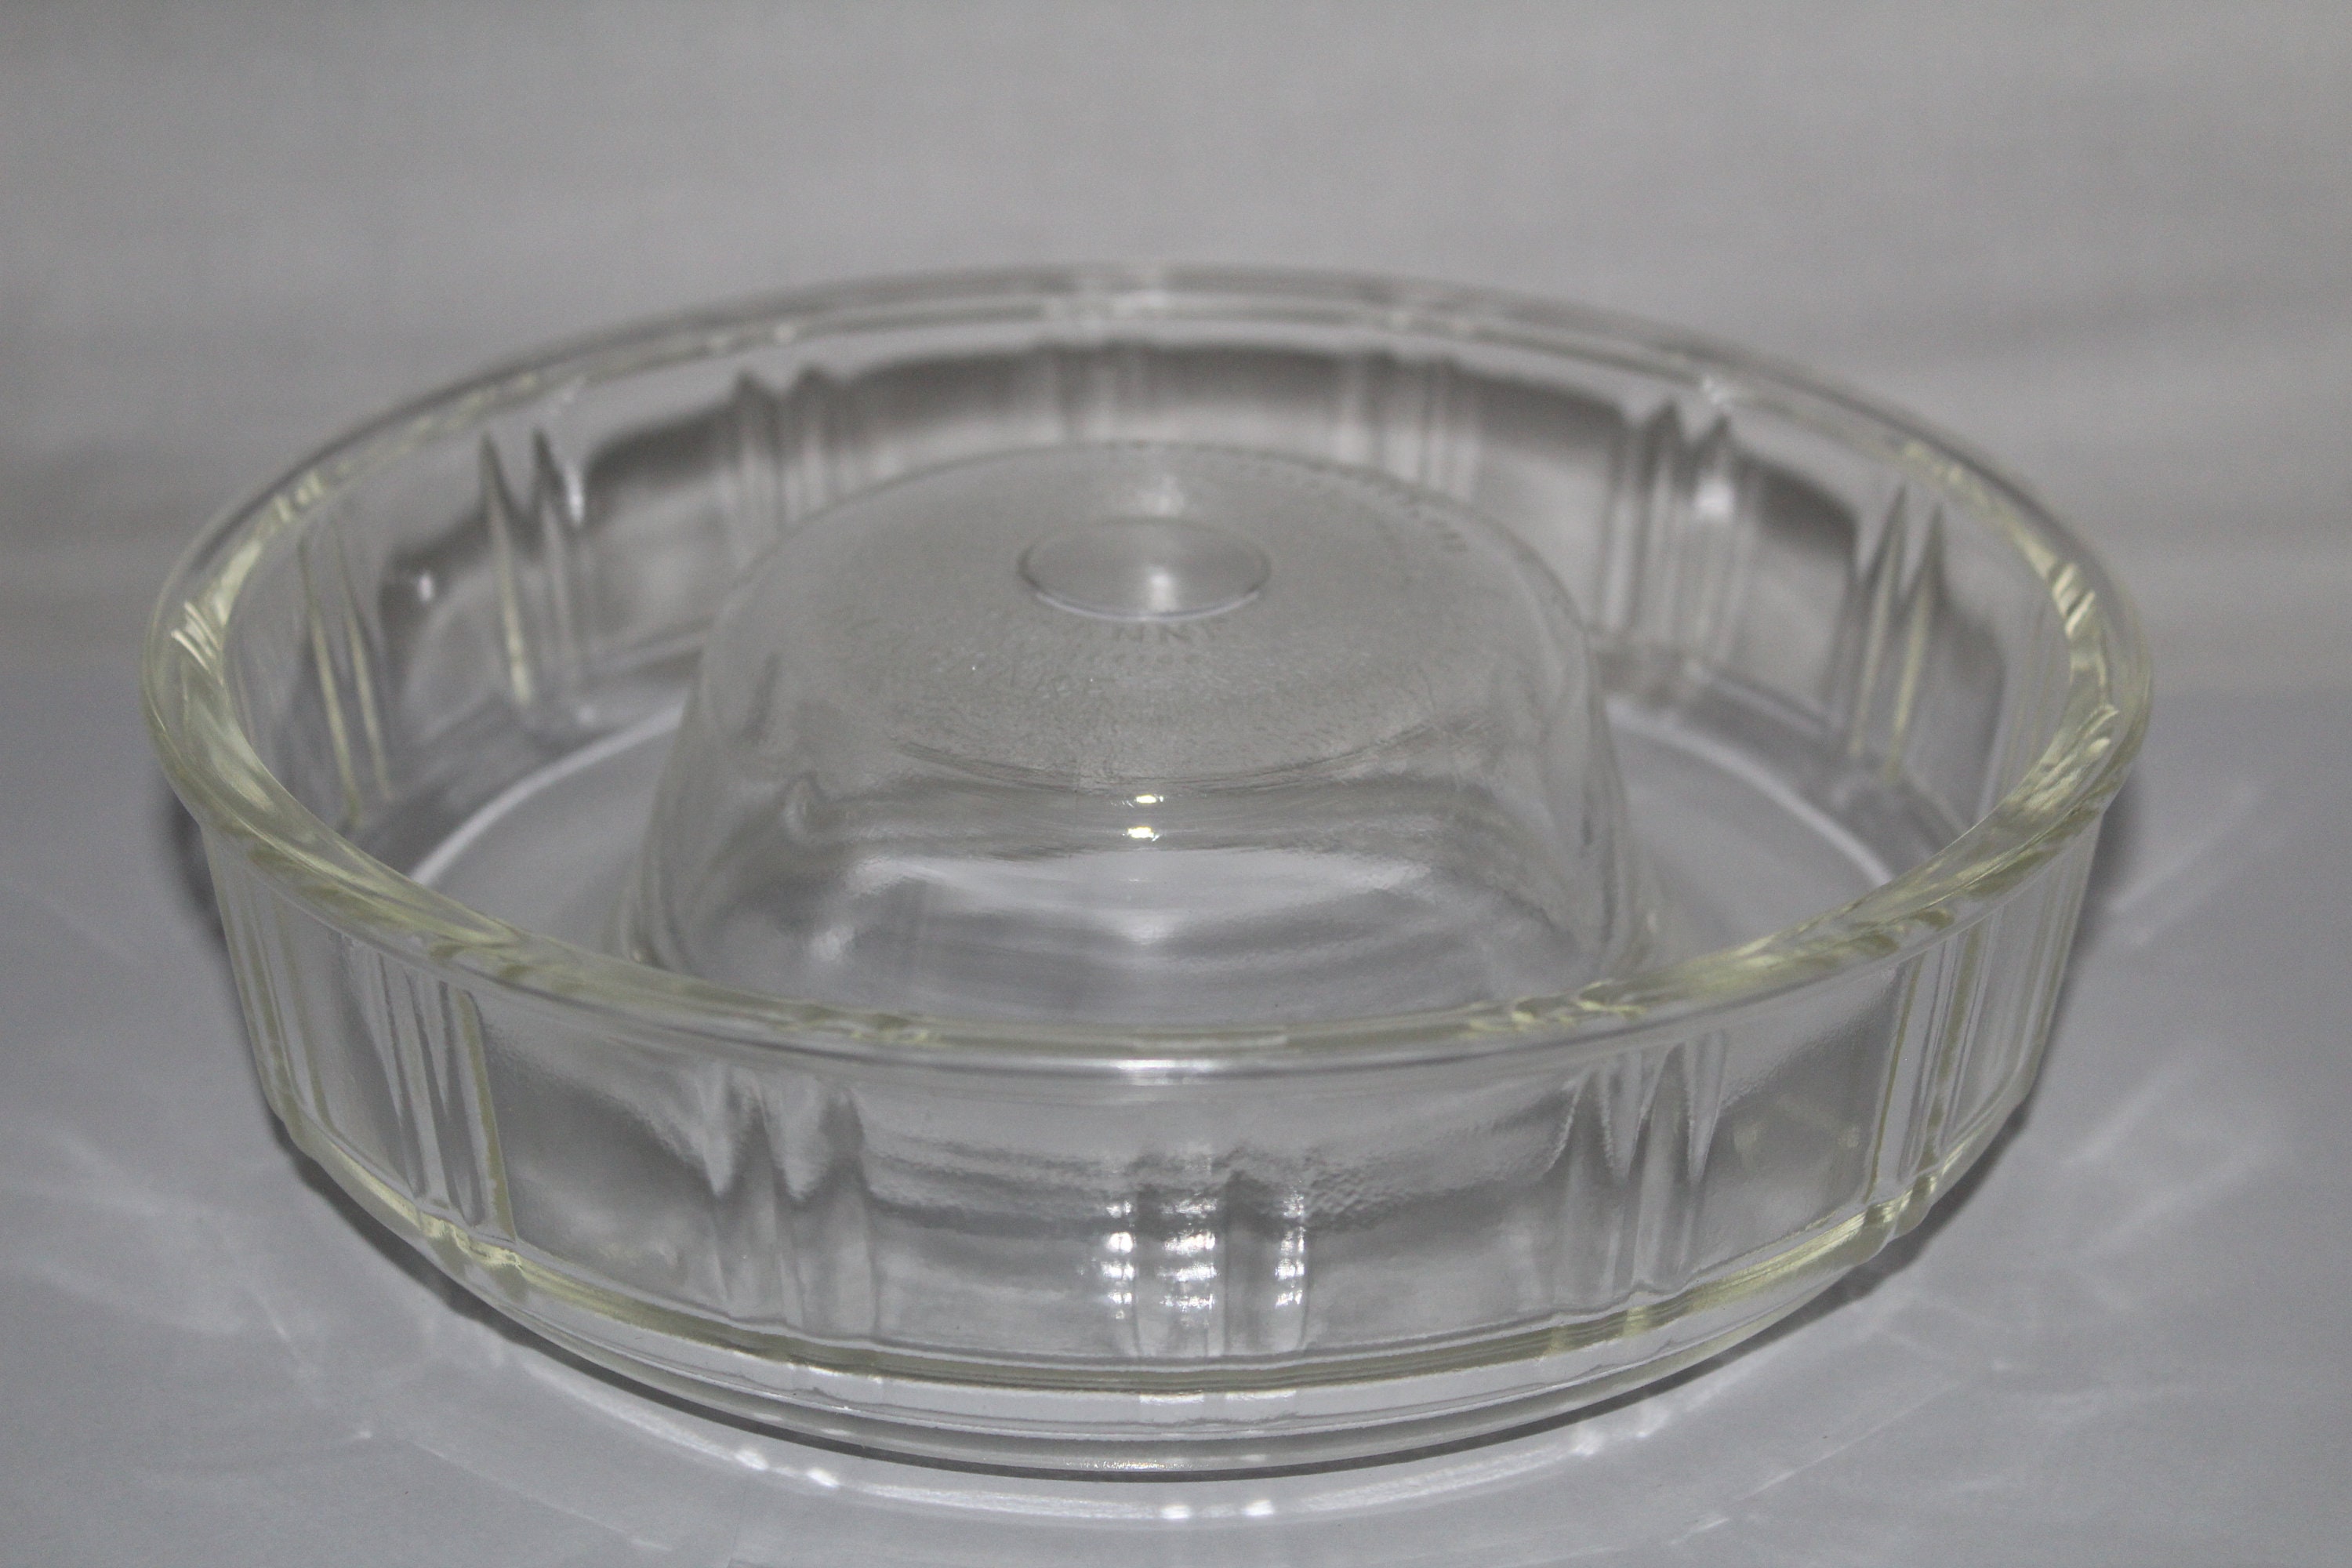 Glasbake Queen Anne Glass Bundt Cake Pan - Old Time Glass